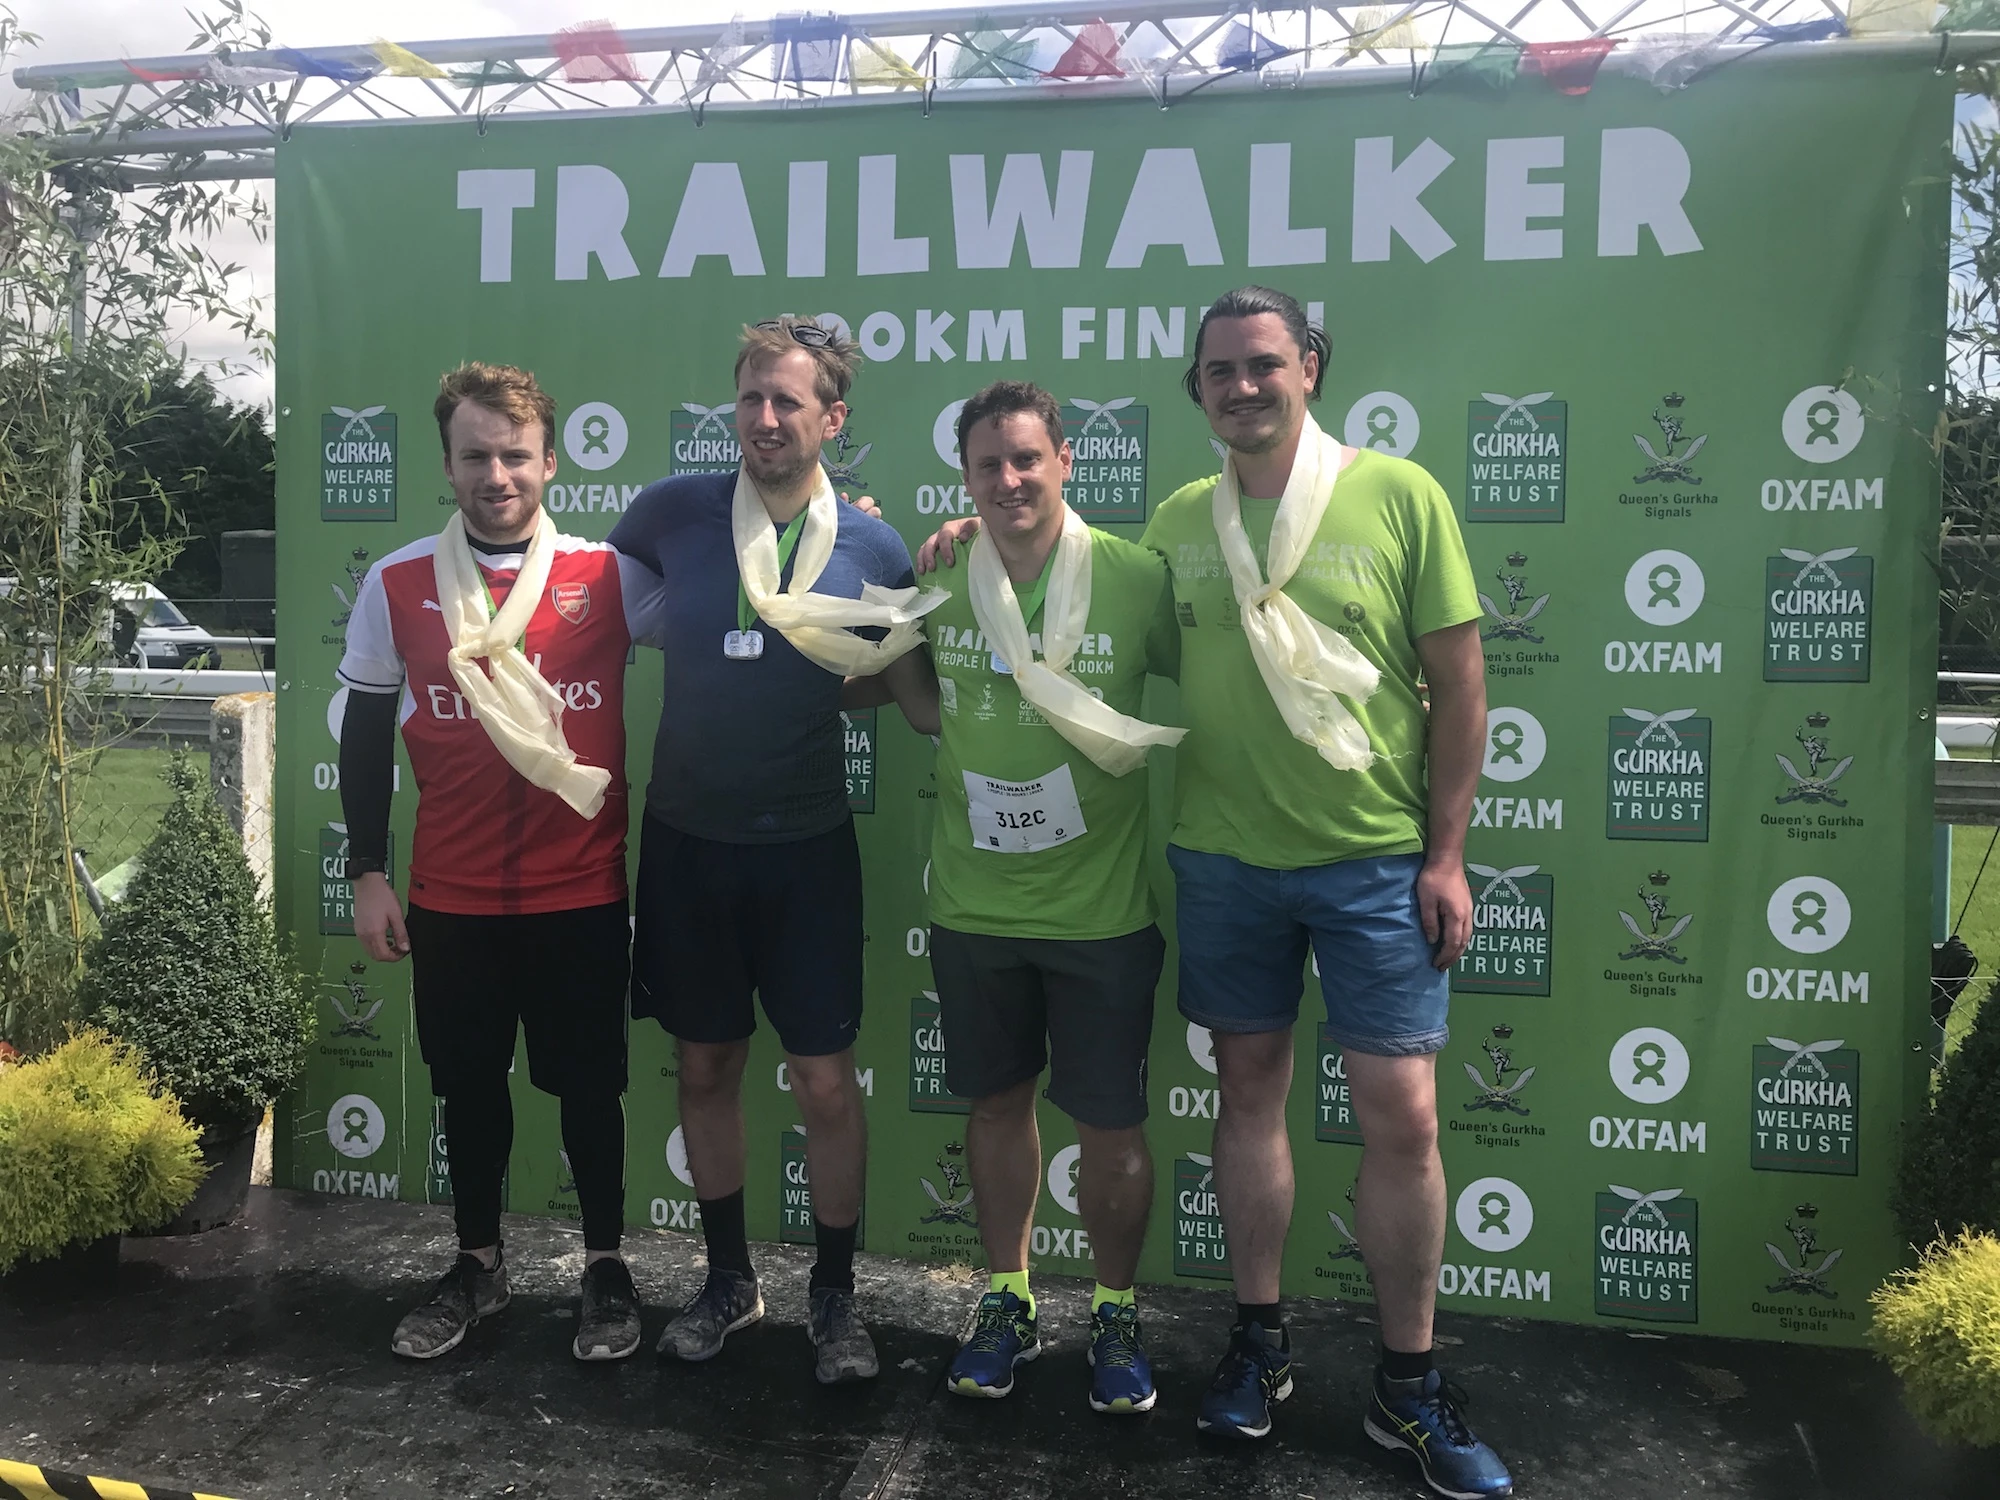 A team of lawyers from Manchester law firm Taylors reached the finish line after a gruelling 60 mile race through atrocious conditions – left to right: Sean Jackson, Jonathan Lavery, Stuart Beatson and Matthew Catterall.